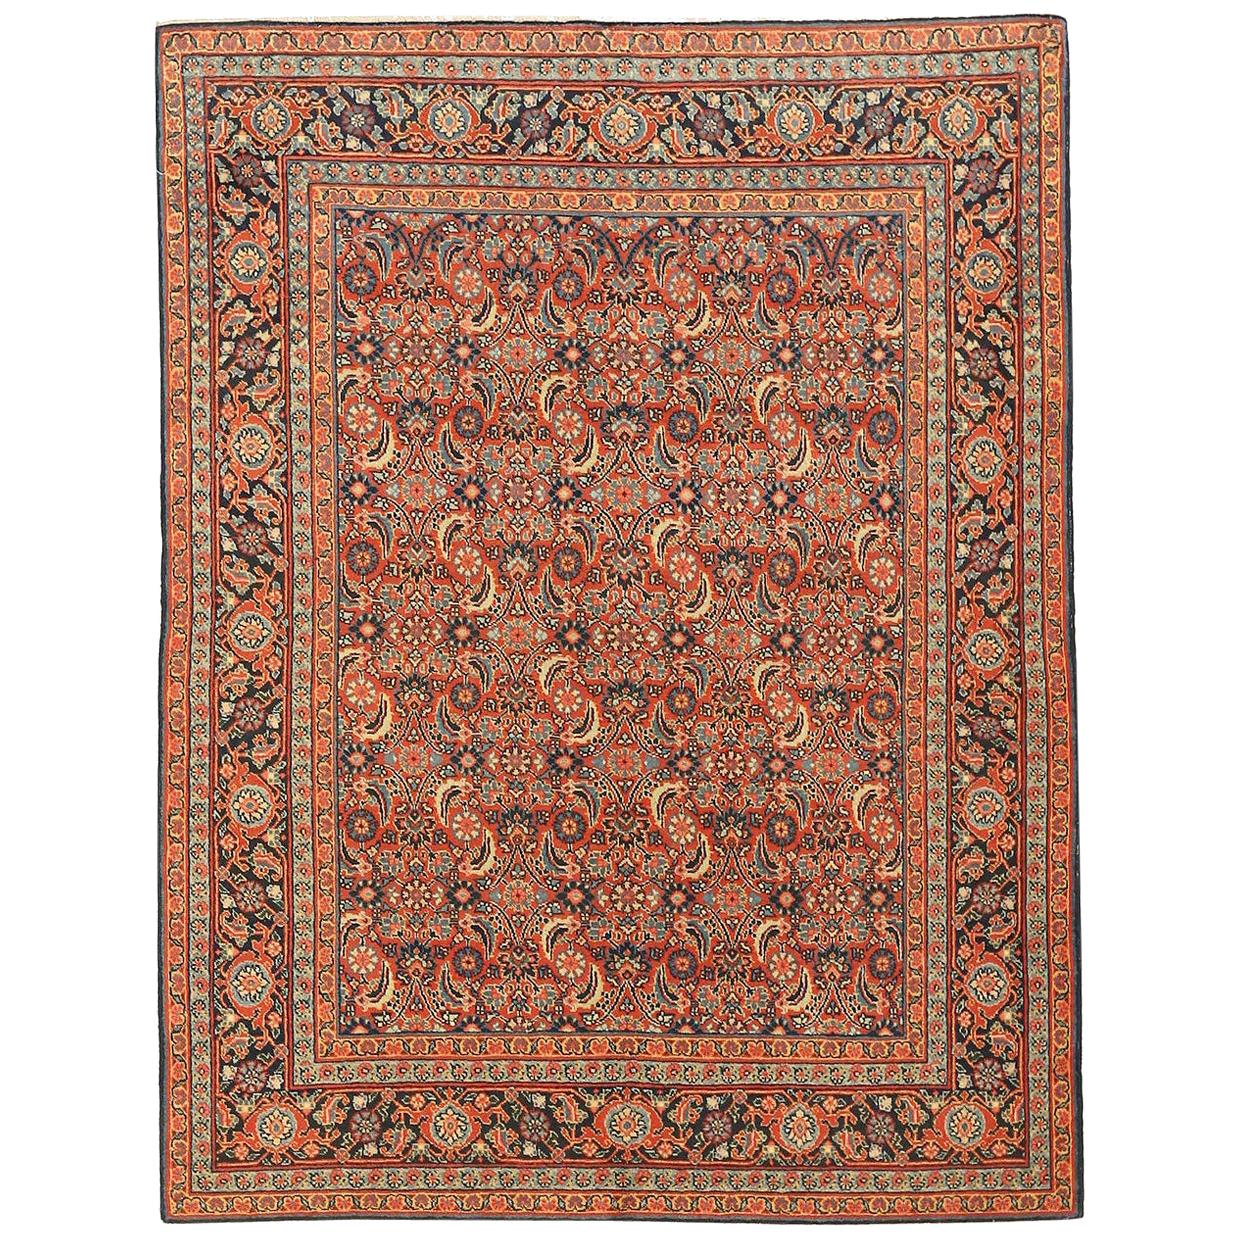 Antique Persian Tabriz Rug with Gray and Black Flower Details on Beige Field For Sale